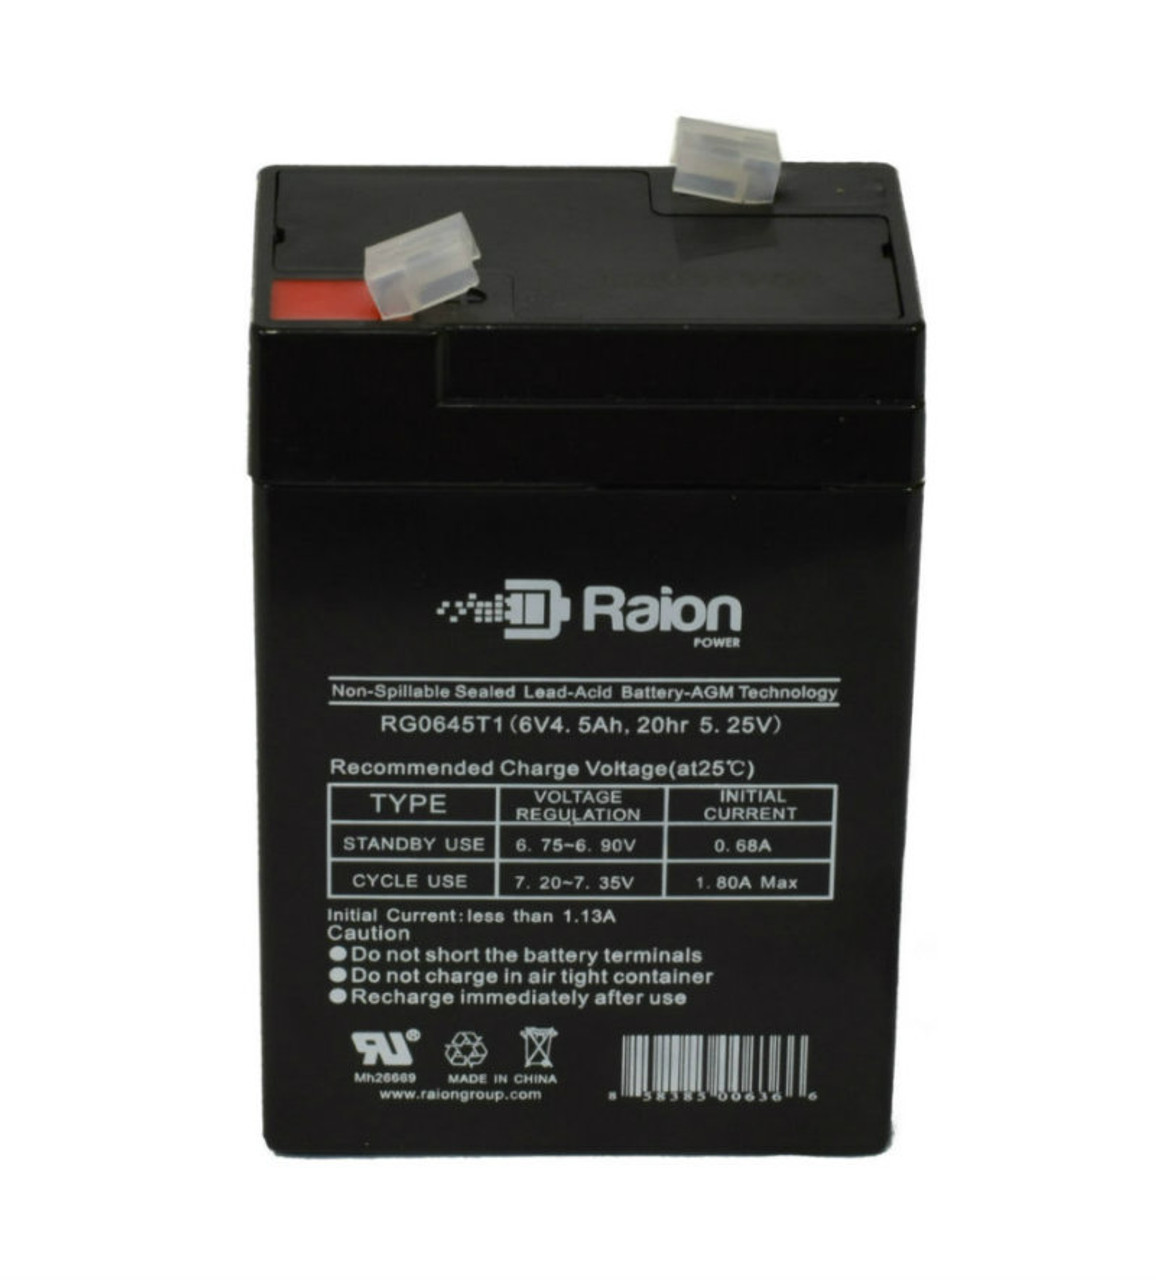 Raion Power RG0645T1 Replacement Battery Cartridge for Dorcy Spotlight 41-0796